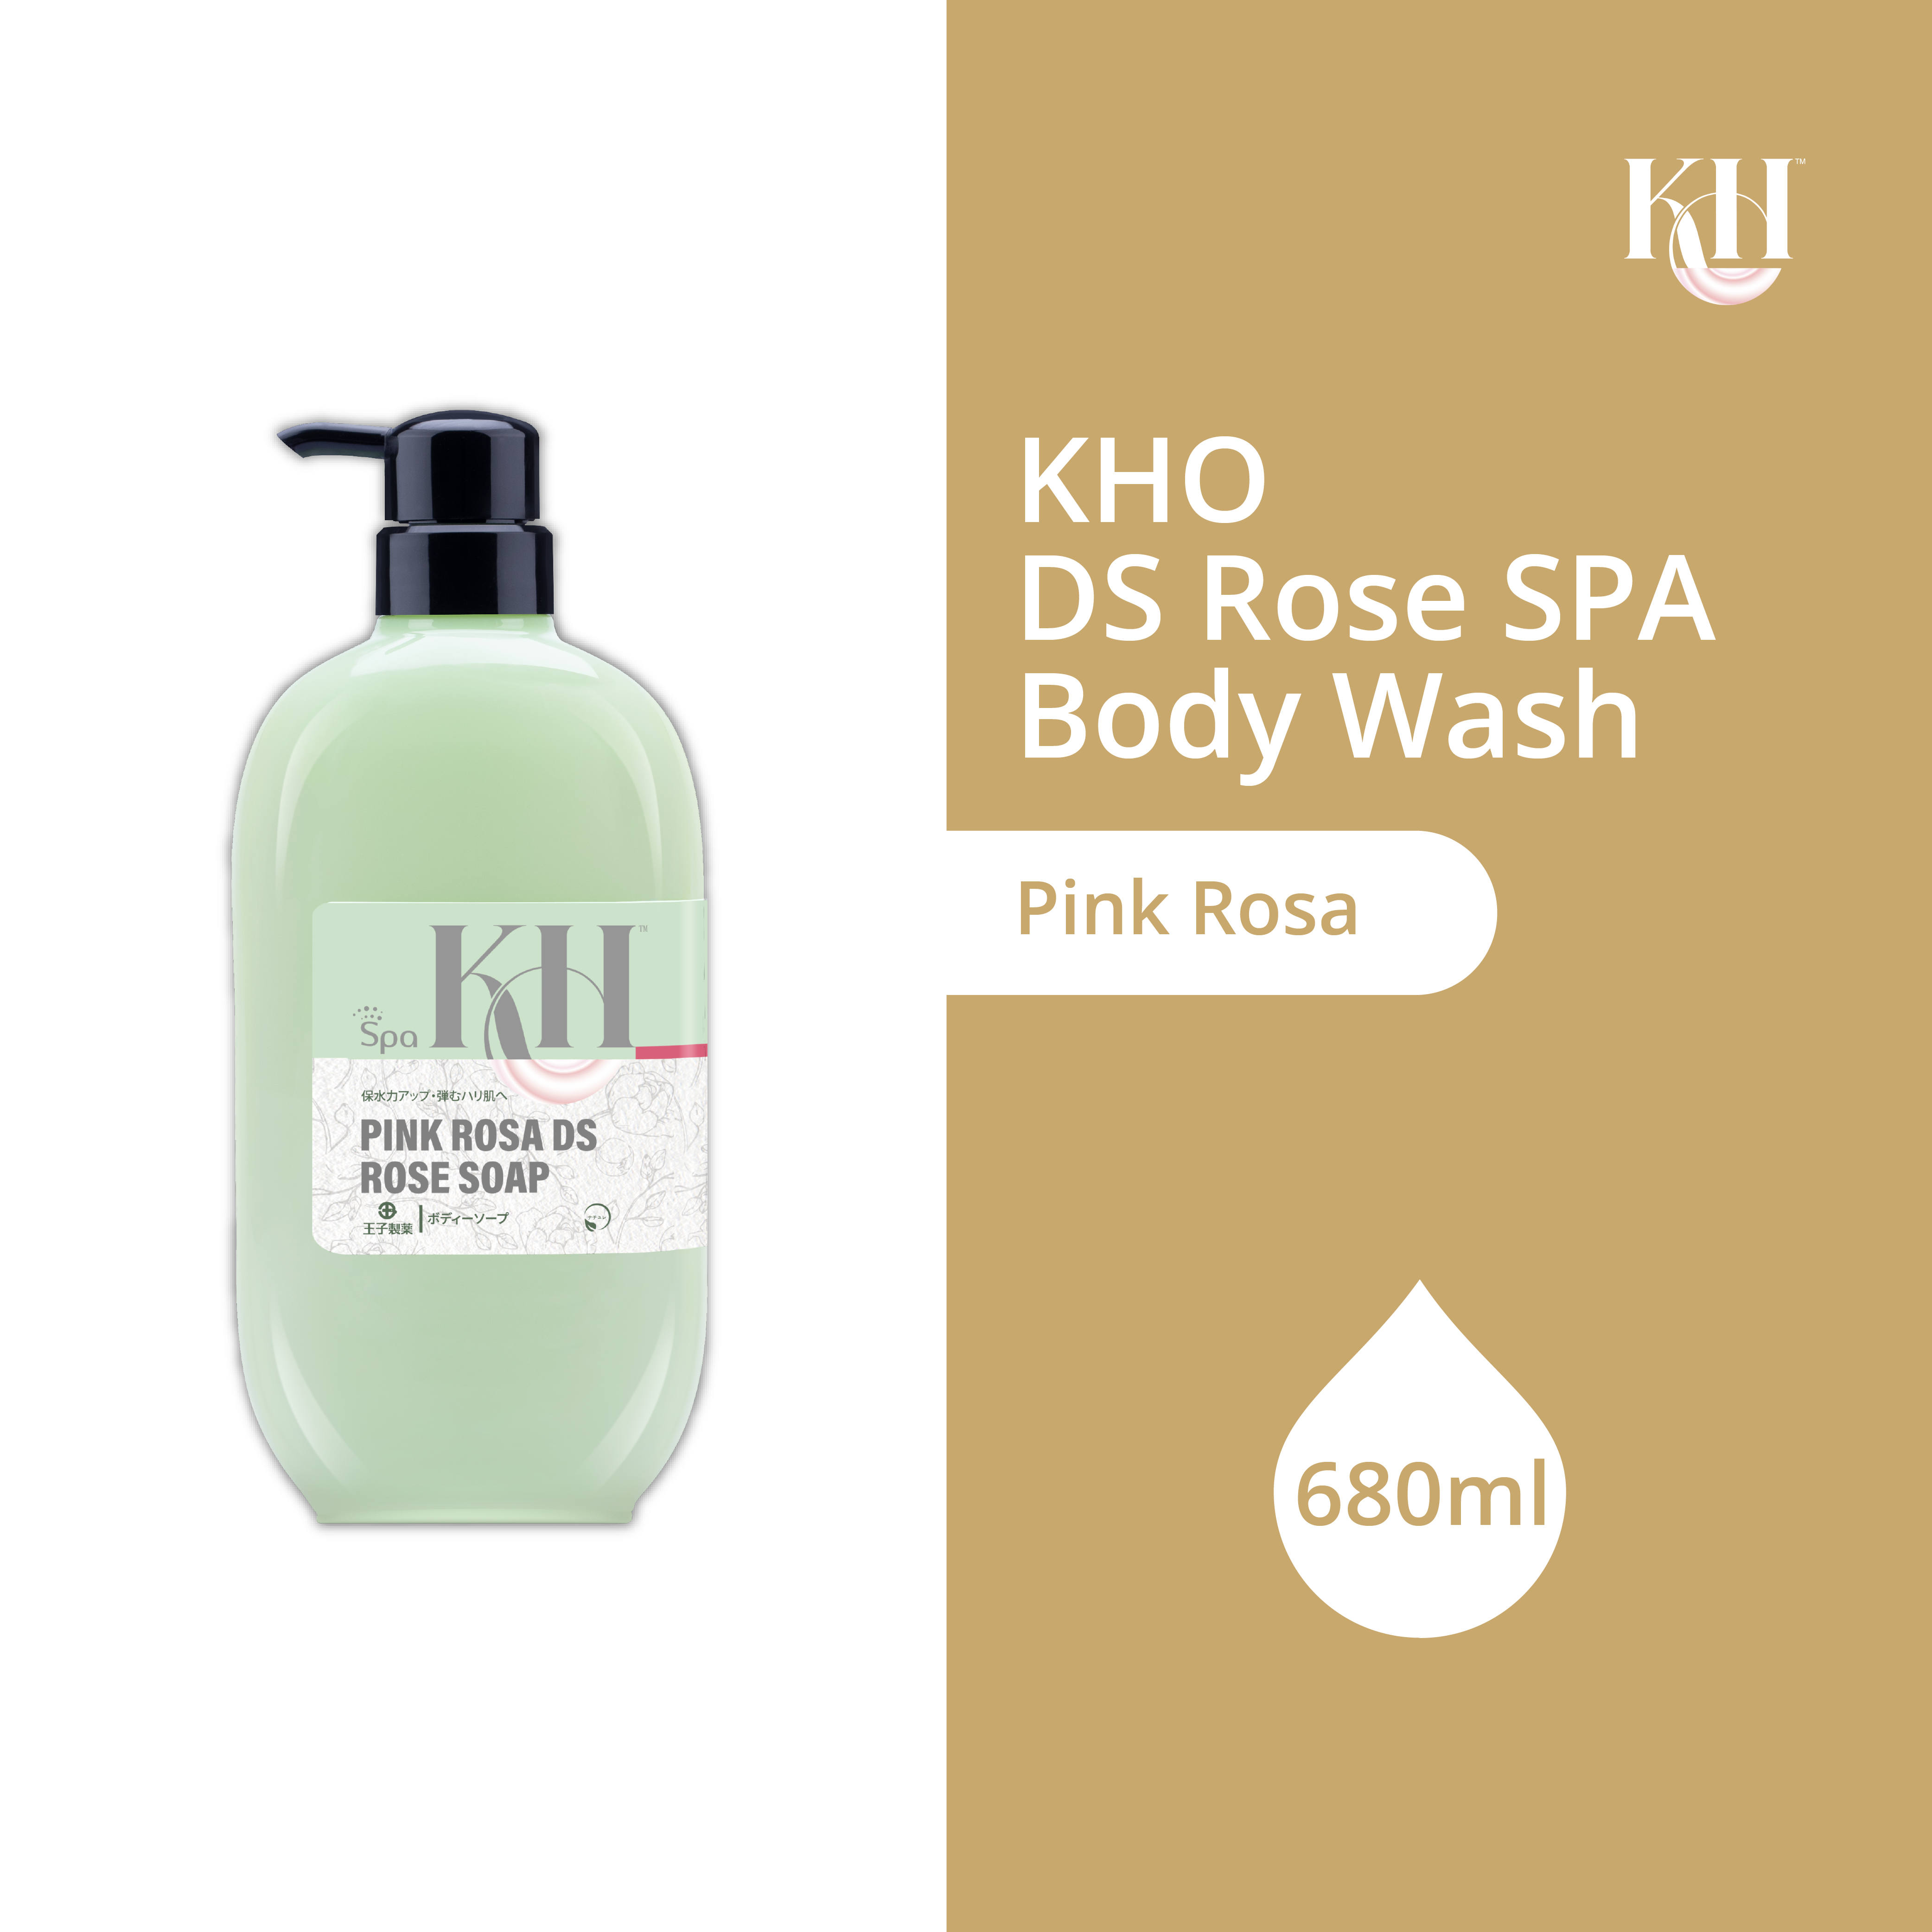 KHO Spa Body Wash (with B3) 680ml – Pink Rosa